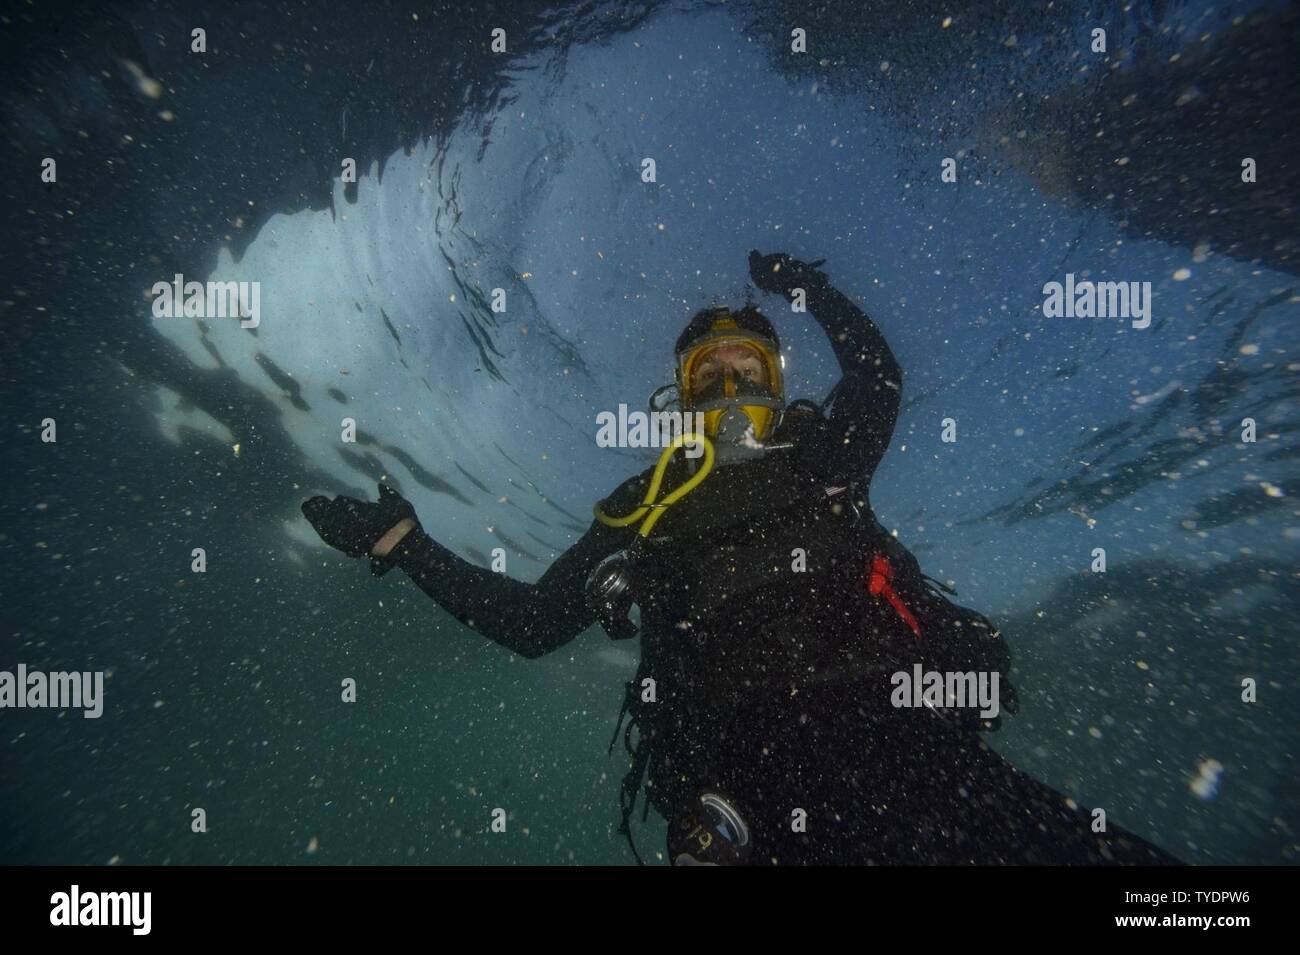 Petty Officer 2nd Class David Savell, assigned to Commander, Task Group (CTG) 56.1, takes part in an Anti-Terrorism Force Protection dive off the coast of Bahrain, Nov. 5th, 2016. CTG -56.1 conducts mine countermeasures, explosive ordnance disposal, salvage-diving and force protection operations throughout the U.S. 5th Fleet area of operations. Stock Photo